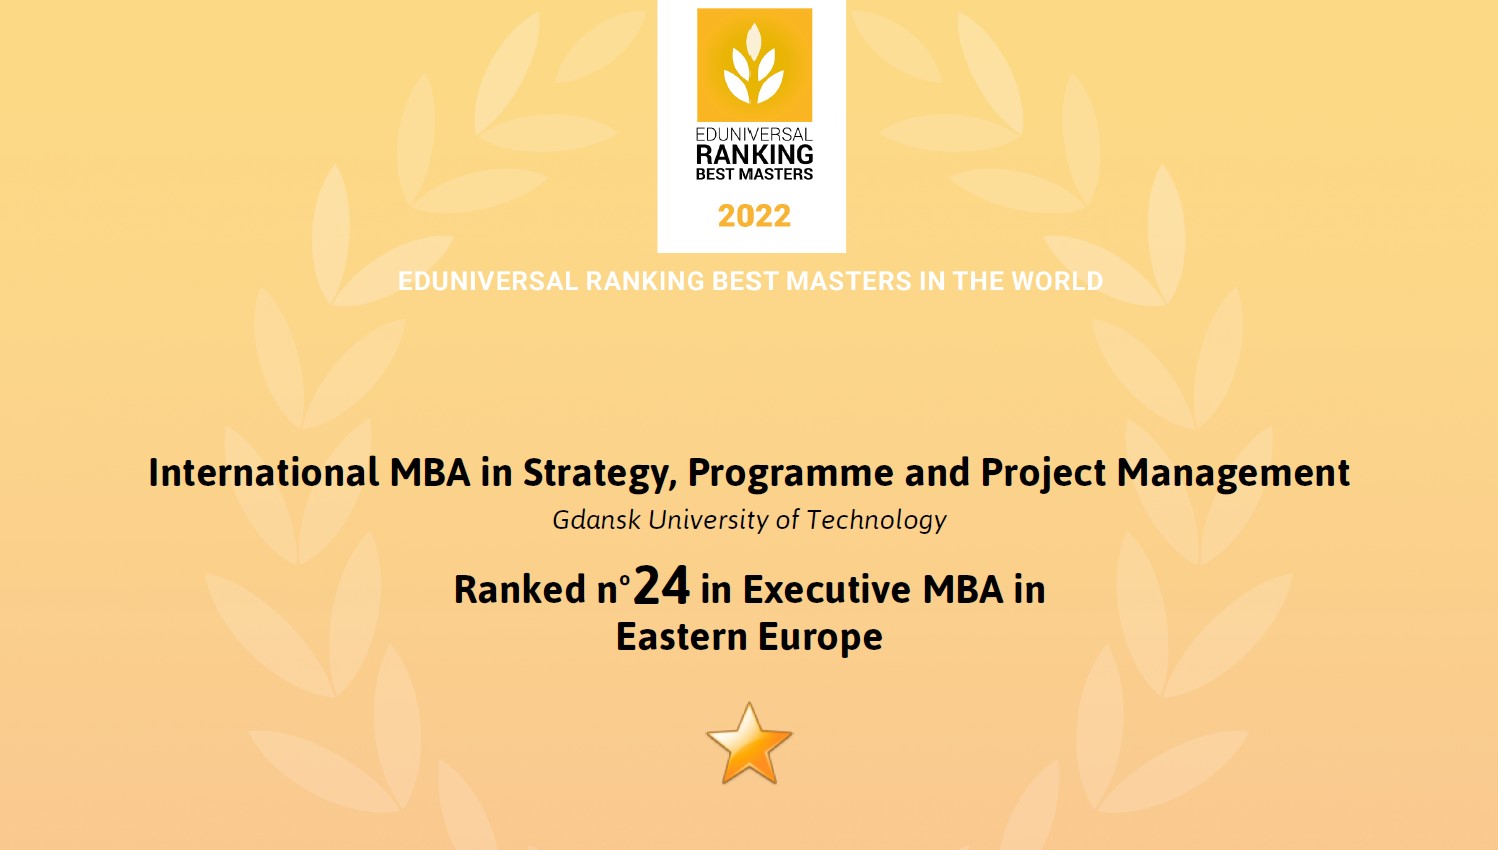 Eduniversal Ranking – 24th place in Eastern Europe